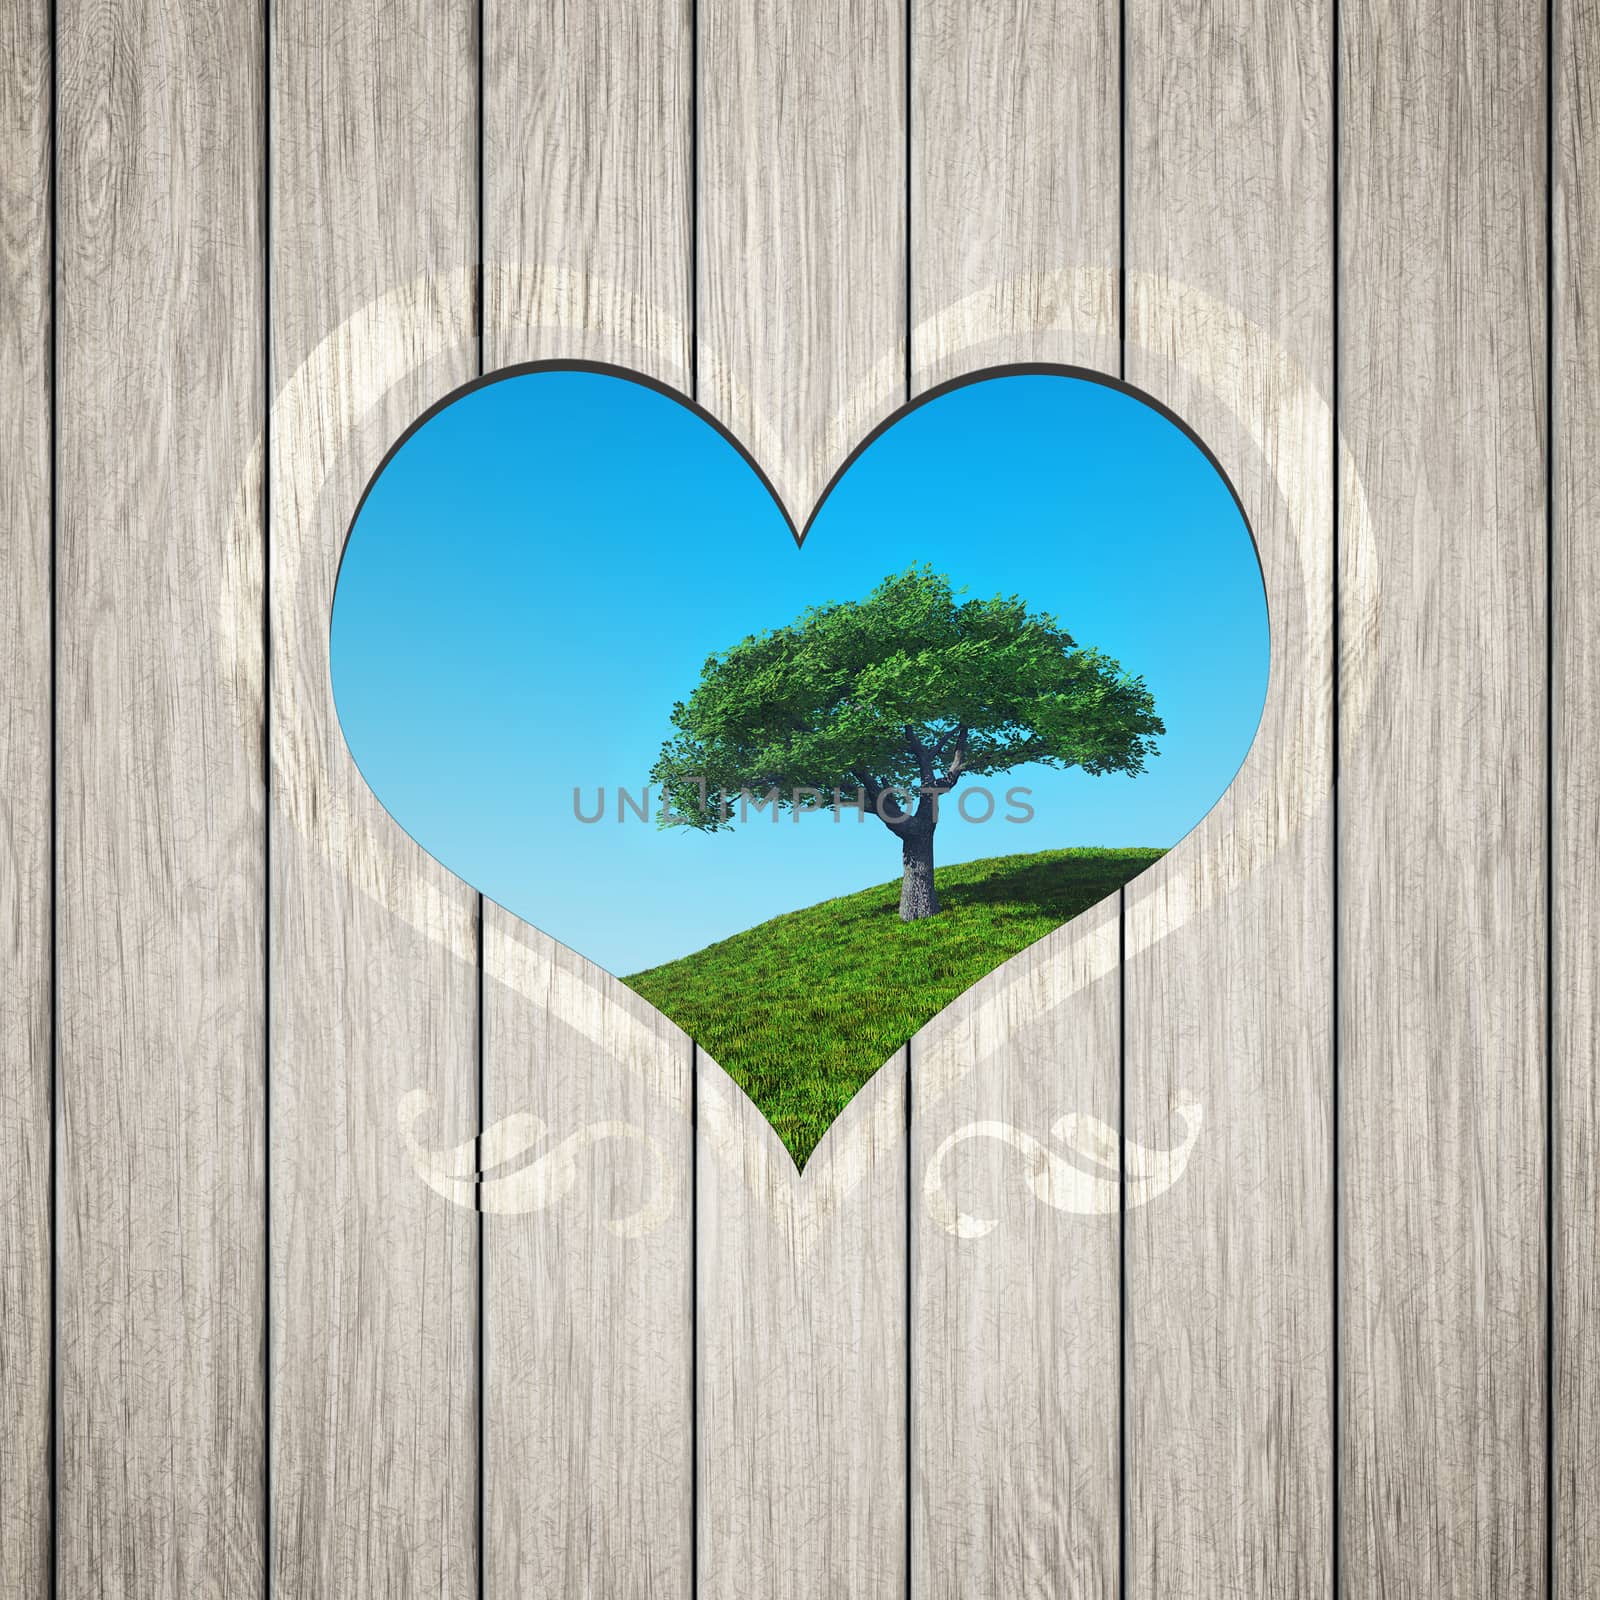 An image of a beautiful wooden heart with a tree